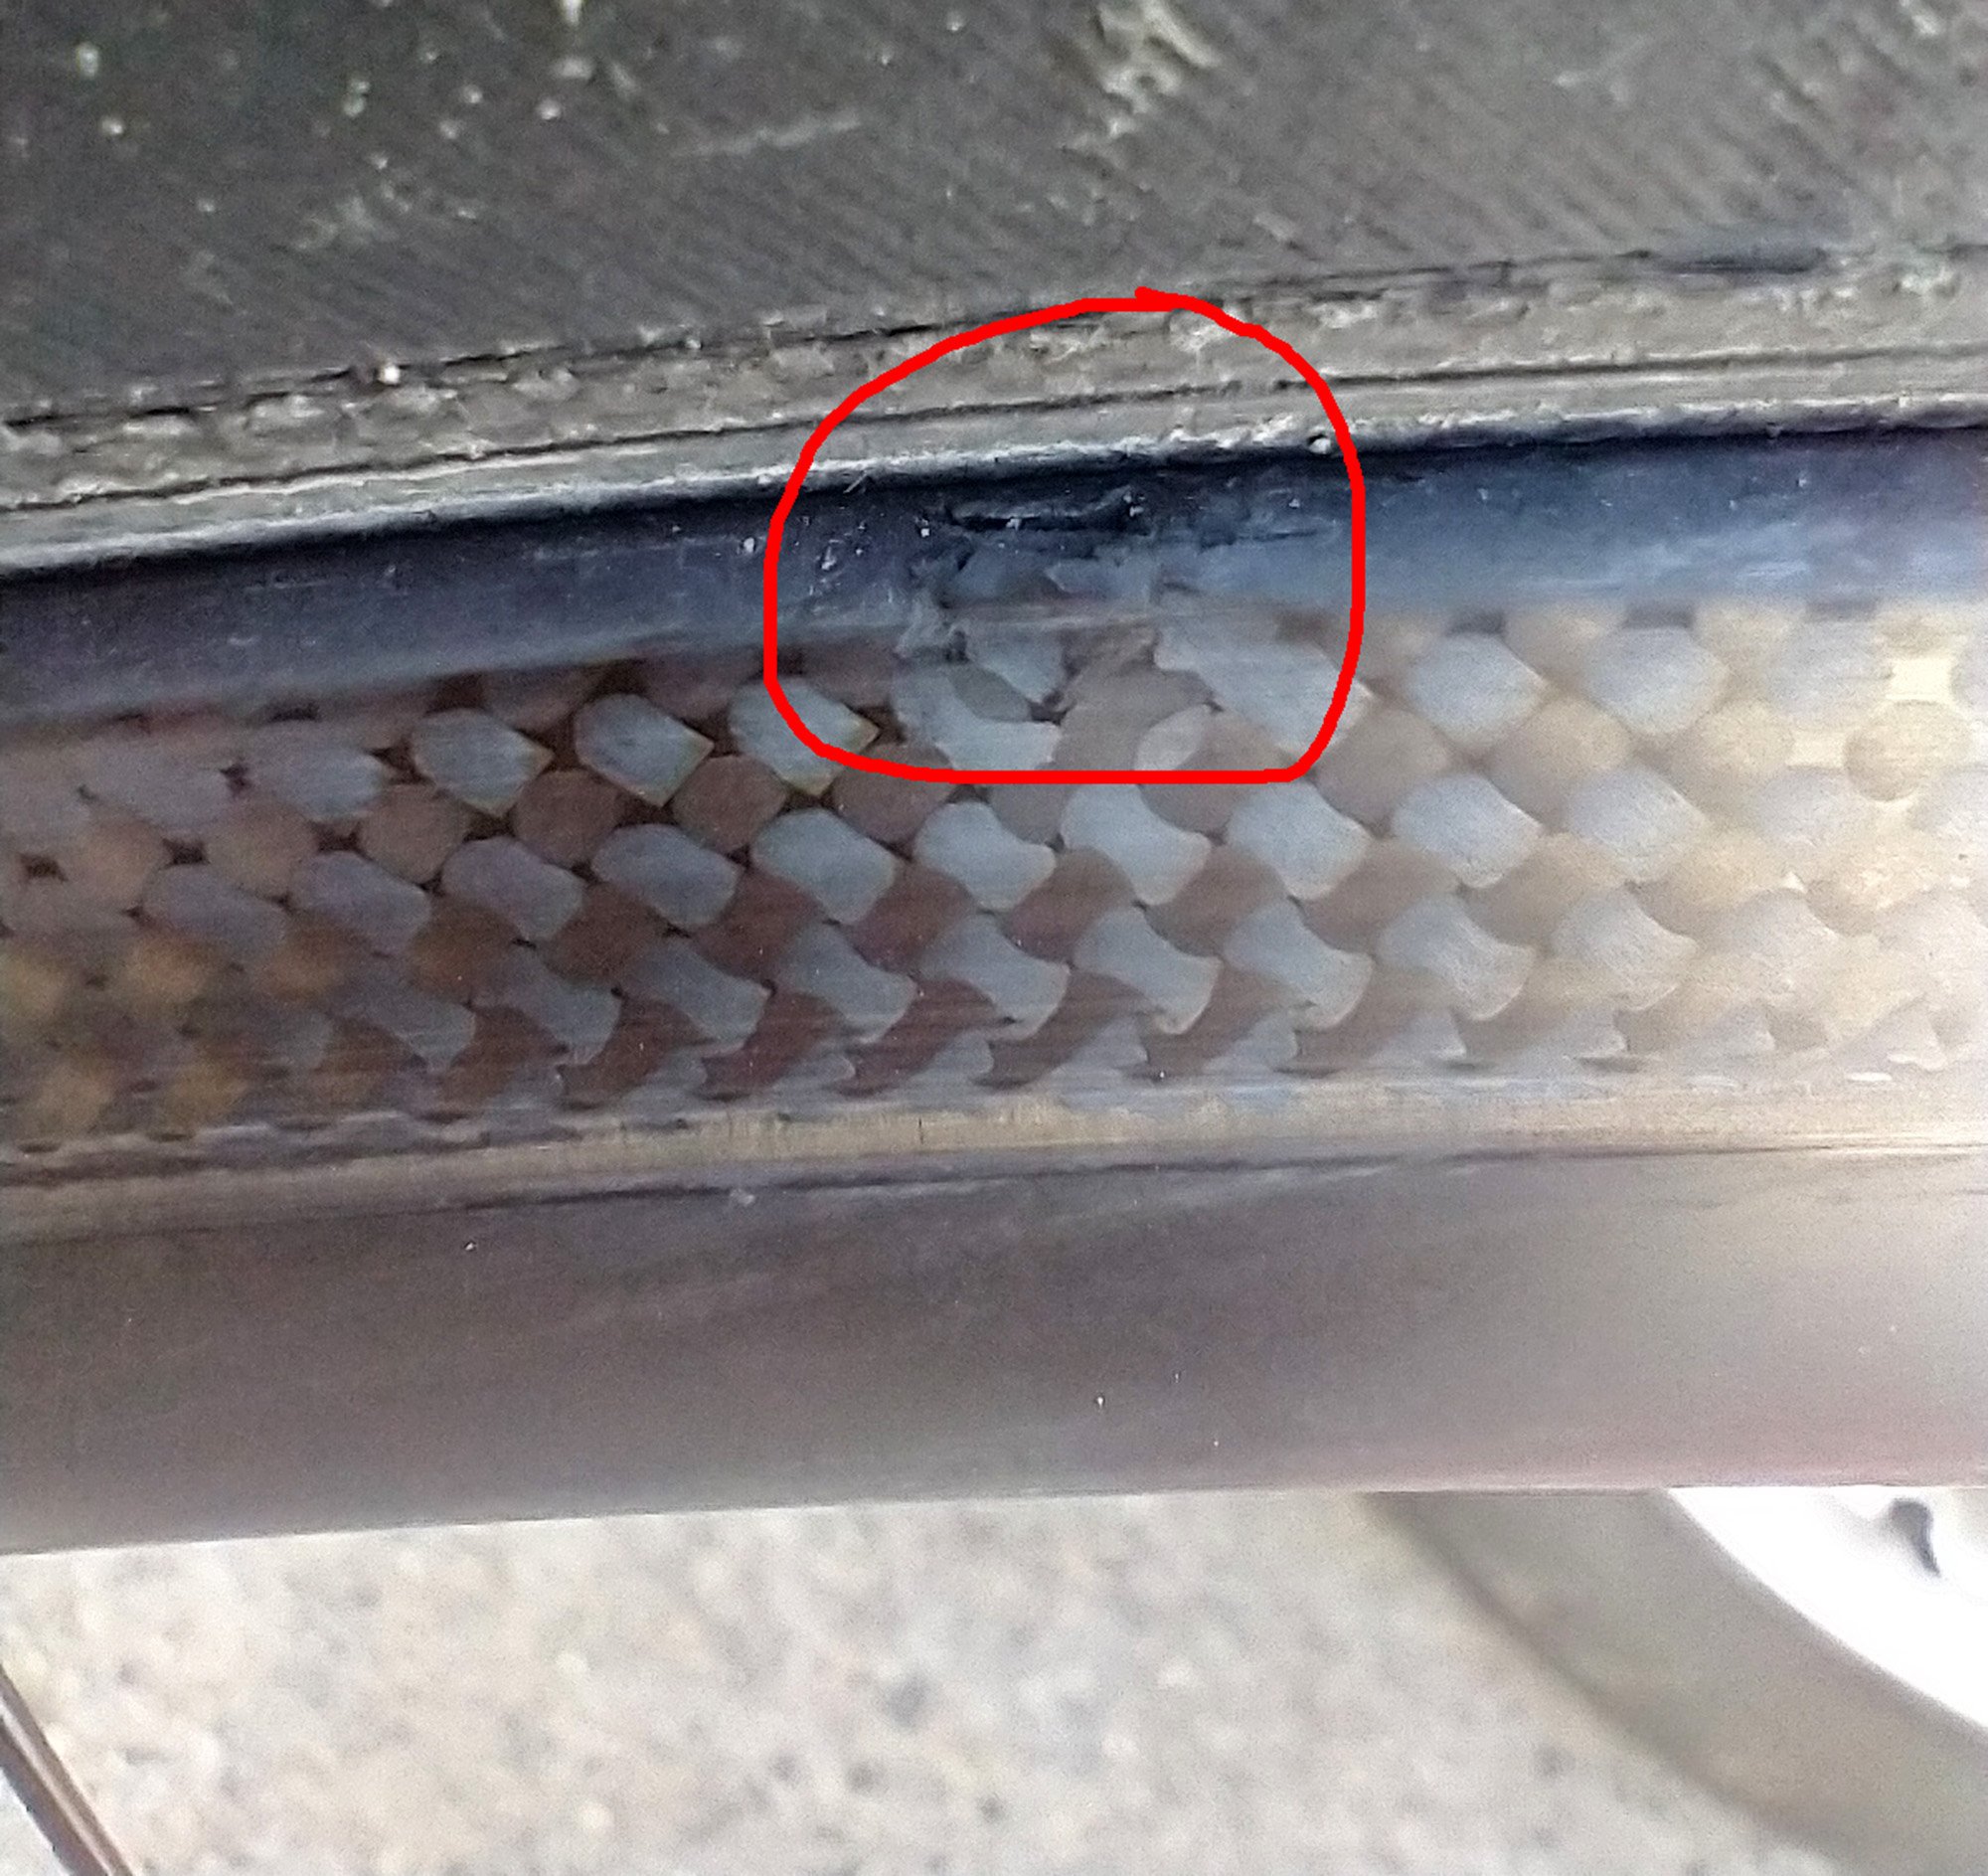 Was inflating my tires one morning and noticed this chip in my carbon wheel... Explains the noise and why my brake pads were getting shredded... This is an emergency as riding on this could kill you.